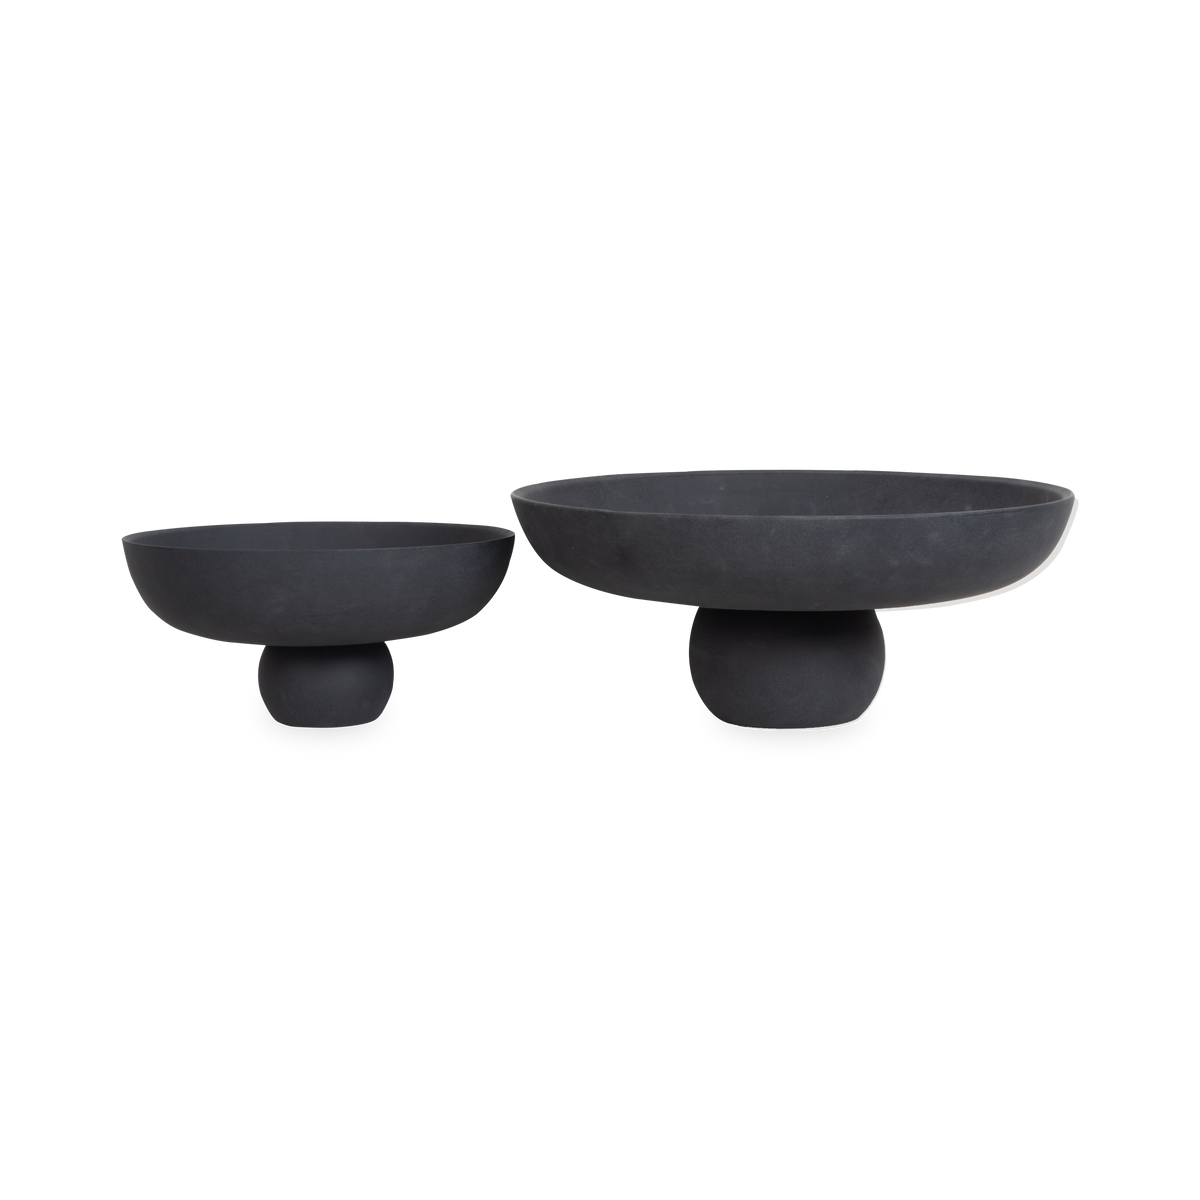 Adding elements of contemporary design to any living area, the Babaru Bowl is a sculptural take on a traditional Japanese bowl design.